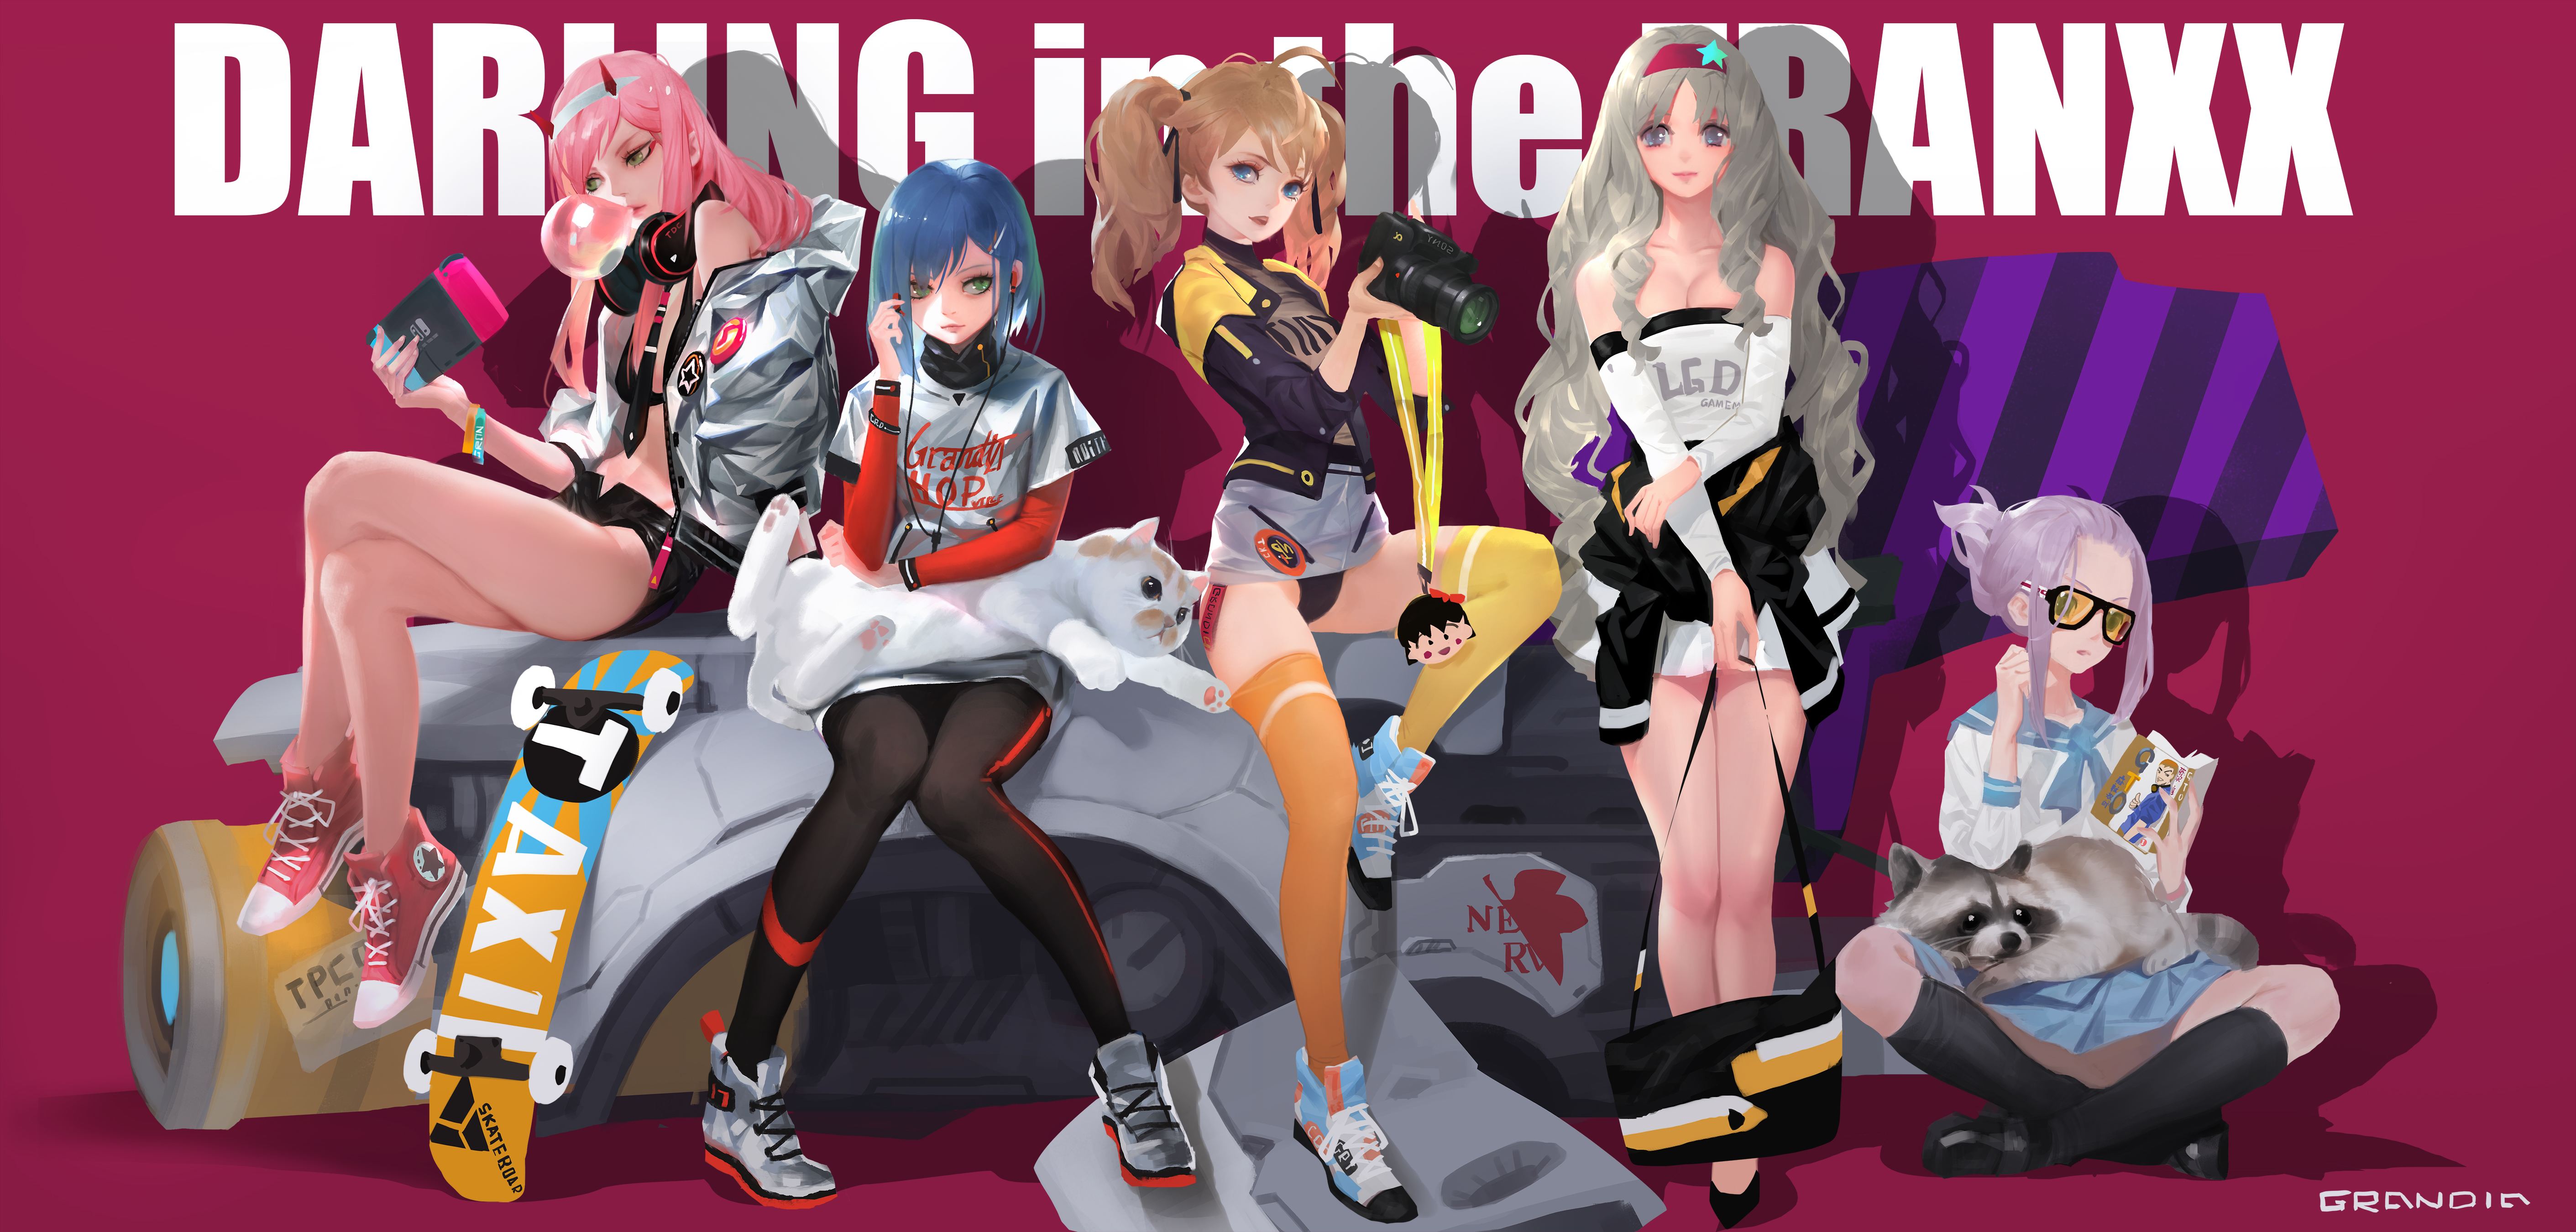 Anime 5644x2700 Darling in the FranXX anime girls Ichigo (Darling in the FranXX) Kokoro (Darling in the Franxx) Code:196 (Ikuno) Zero Two (Darling in the FranXX) Miku (Darling in the Franxx) Nintendo Switch skateboard twintails alternate costume camera women with cat raccoons manga JK bare shoulders long sleeves reading yoga pants thighs long hair pink hair blue hair brunette purple hair smiling ahoge Nerv 2D anime yellow stockings thick thigh fan art anime girls eating